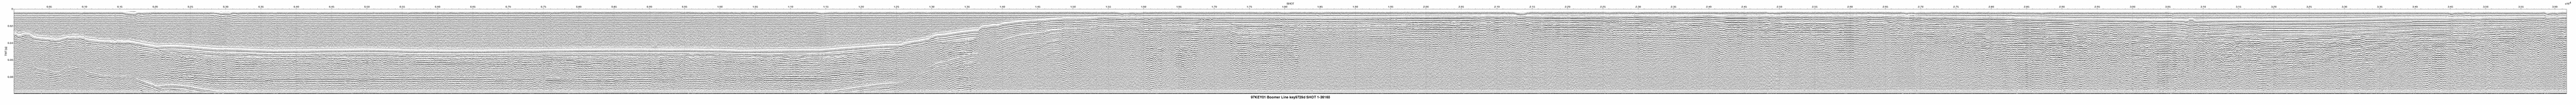 Thumbnail GIF image of the seismic trackline key9729d, with a hotlink to the more detailed, larger JPG image.